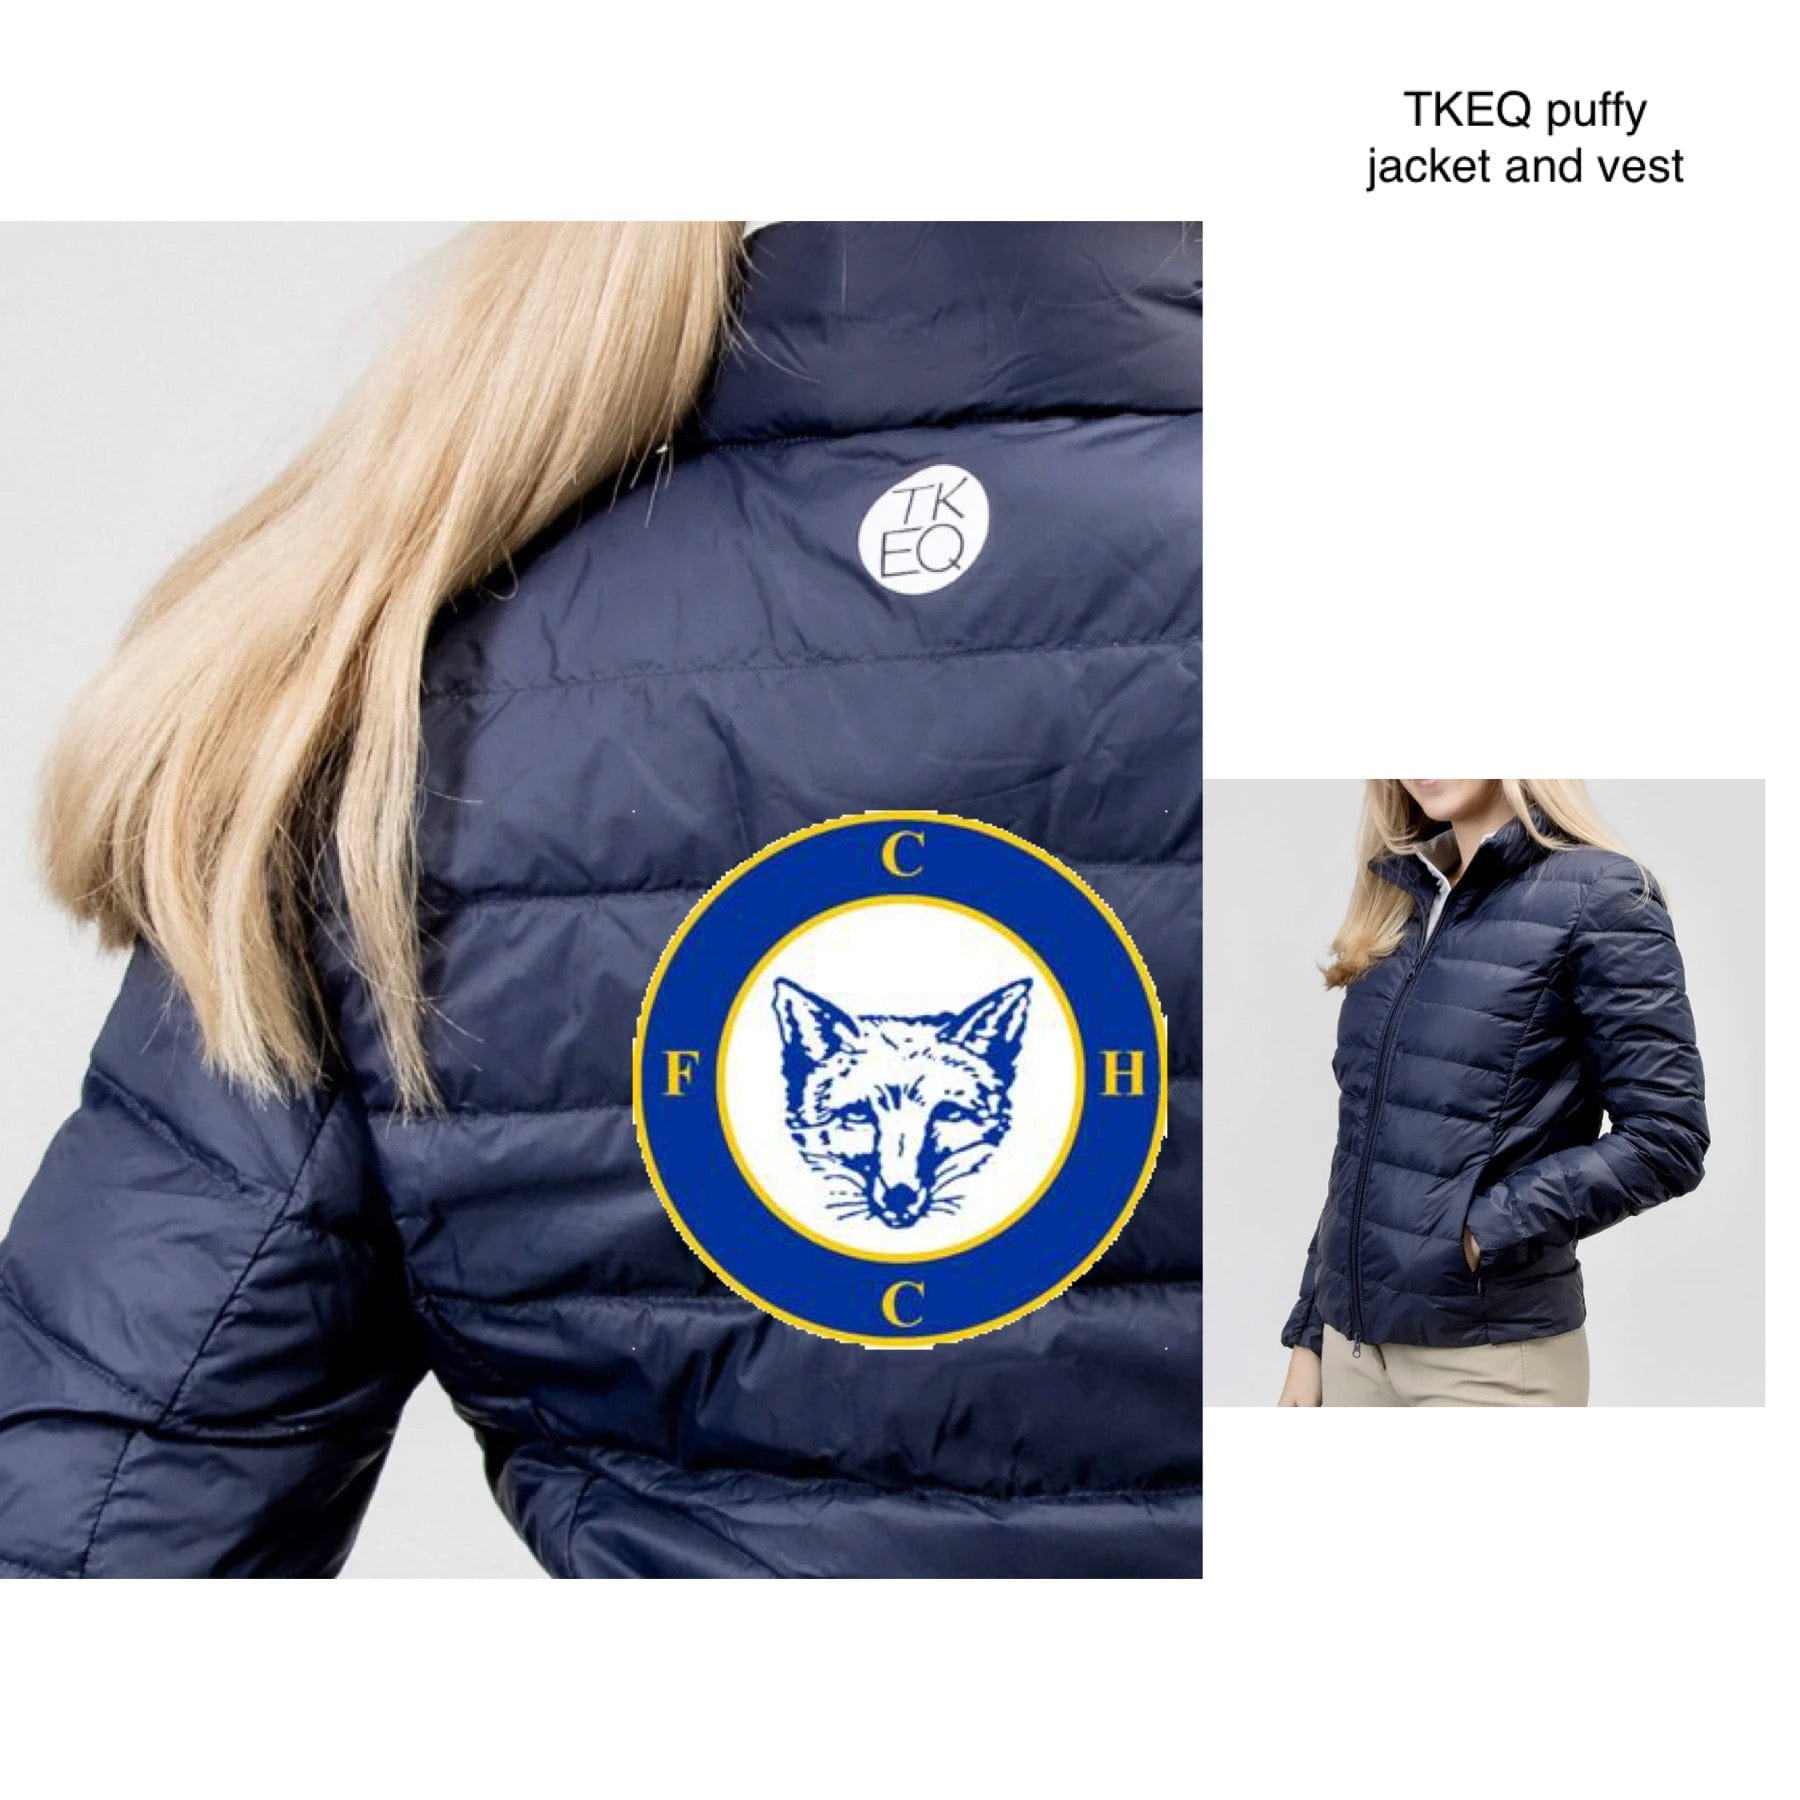 Equestrian Team Apparel FCHC puffy jacket and vest from TKEQ equestrian team apparel online tack store mobile tack store custom farm apparel custom show stable clothing equestrian lifestyle horse show clothing riding clothes horses equestrian tack store